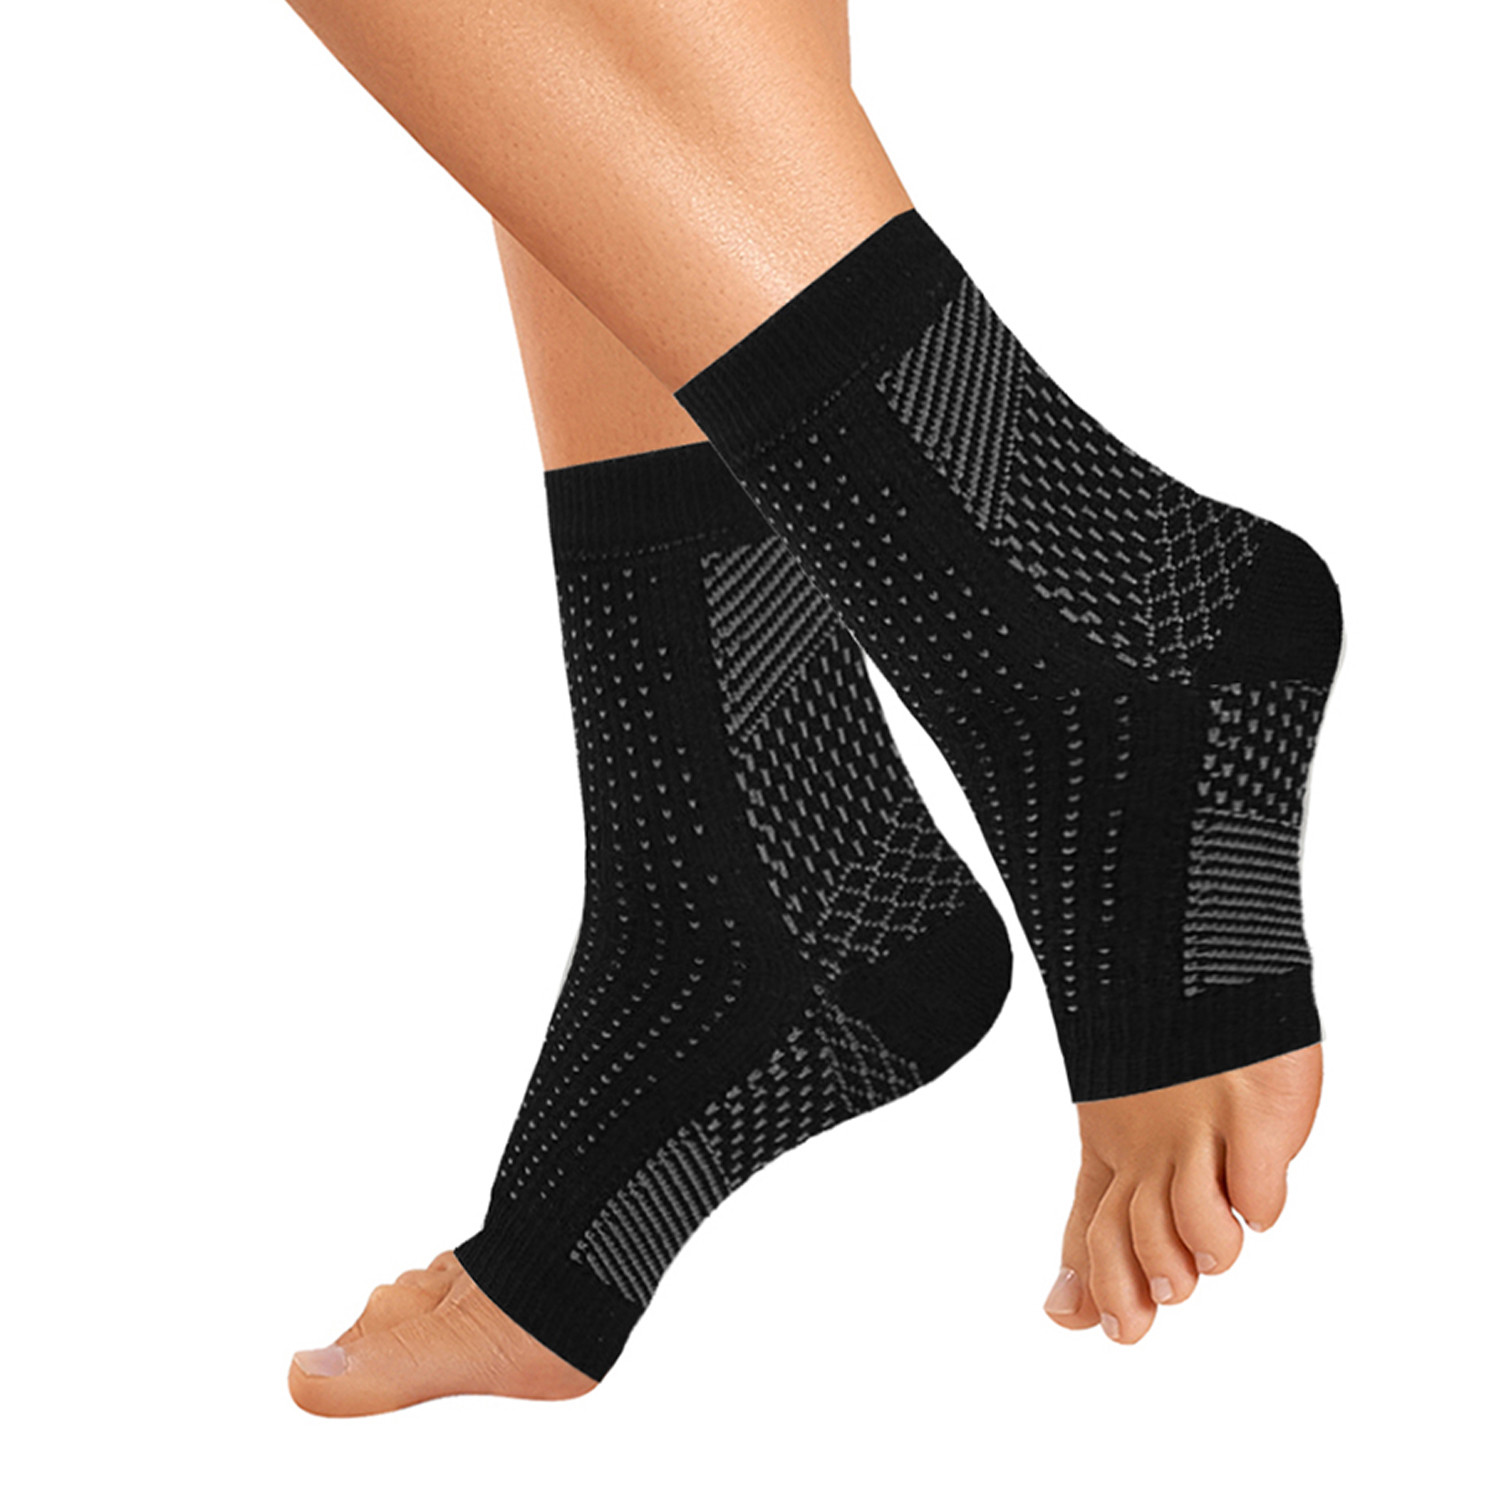 CopperInfused Plantar Fasciitis Compression Foot Sleeves // Black